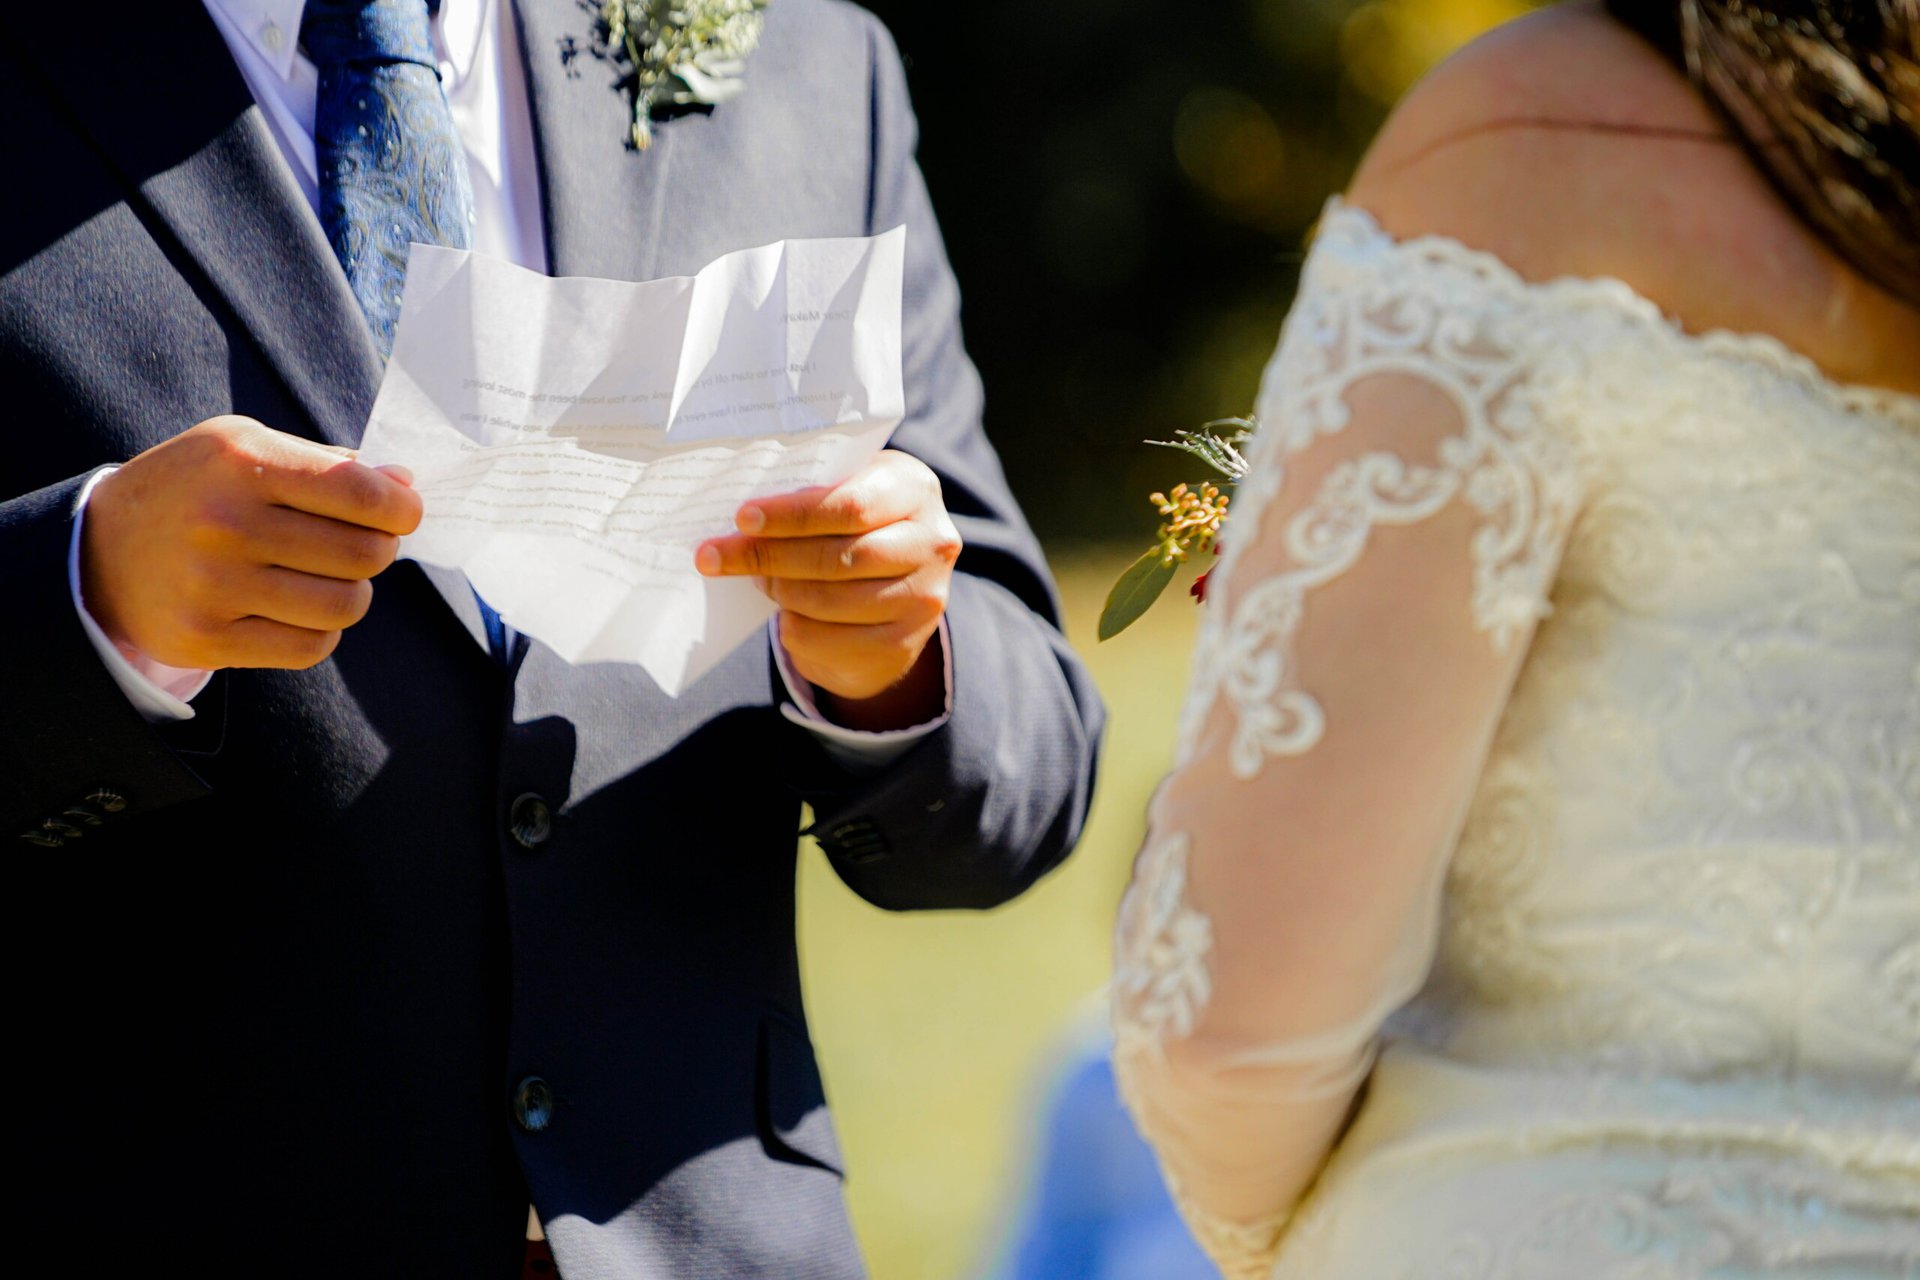 couple renewing their wedding vows man in black suit holding peiece of paper infront of bride.jpg